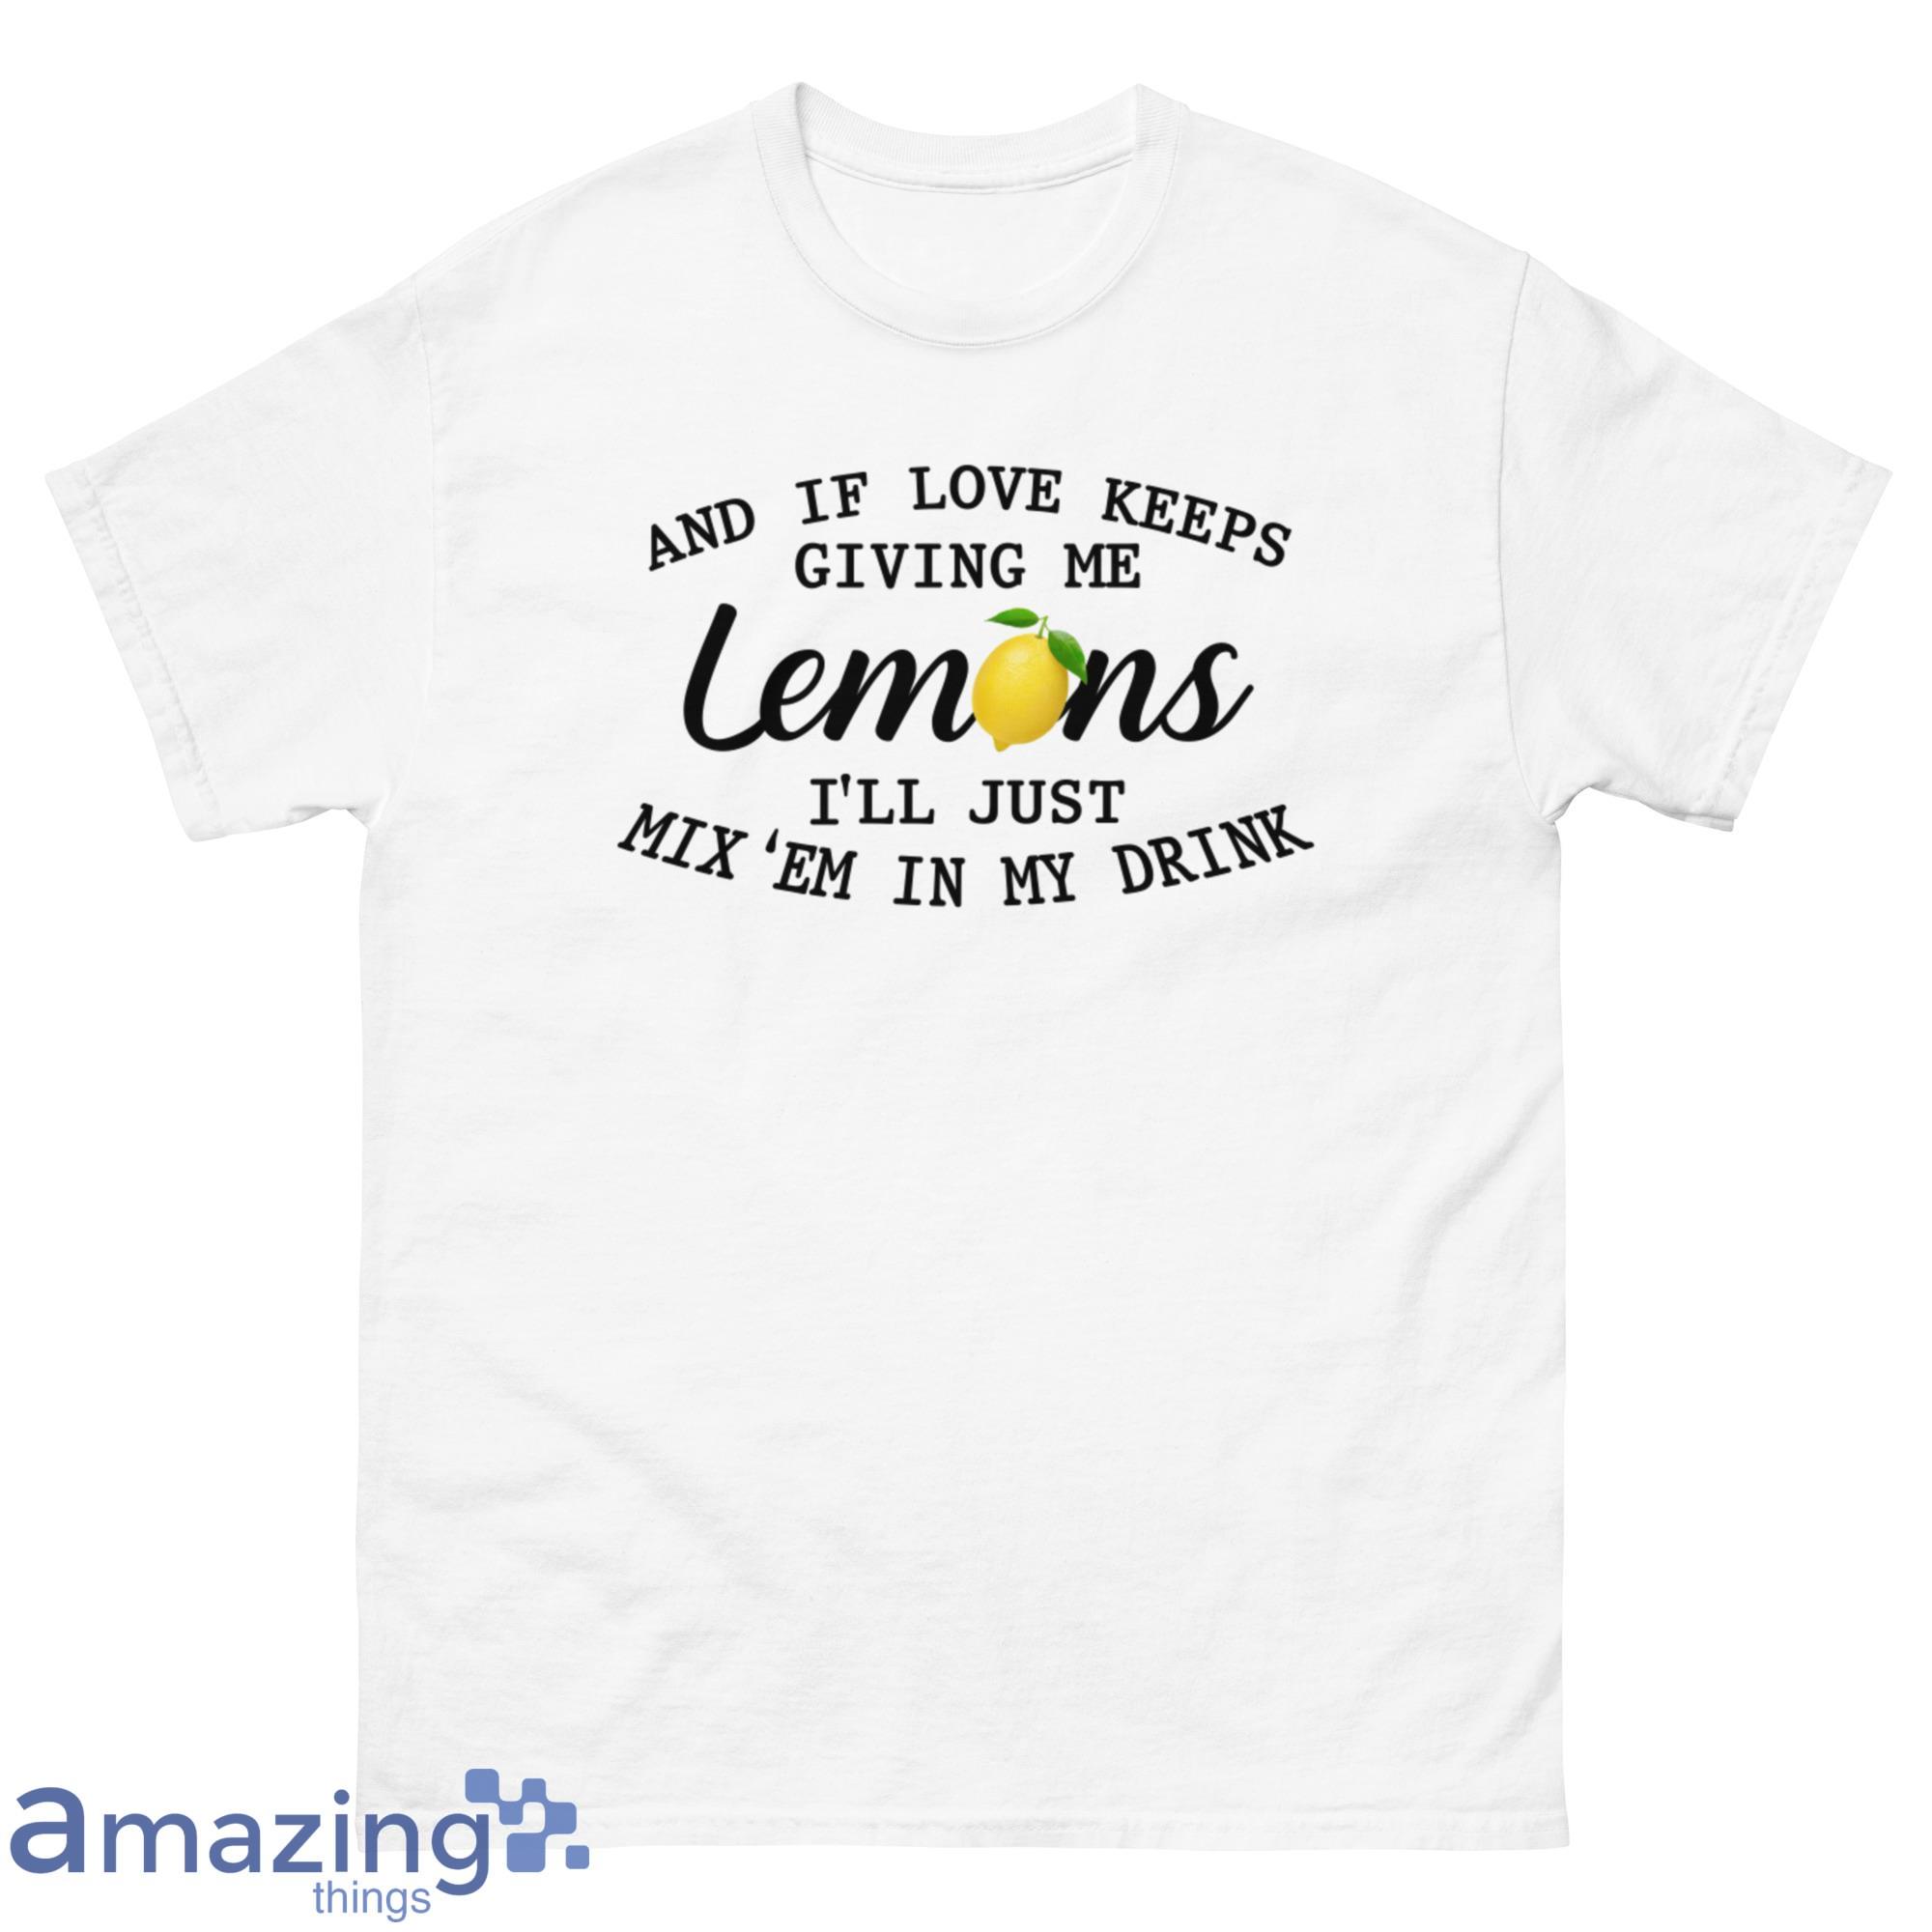 And If Love Keeps Giving Me Lemons I'll Just Mix'em In My Drink Shirt - G500 Men’s Classic T-Shirt-1